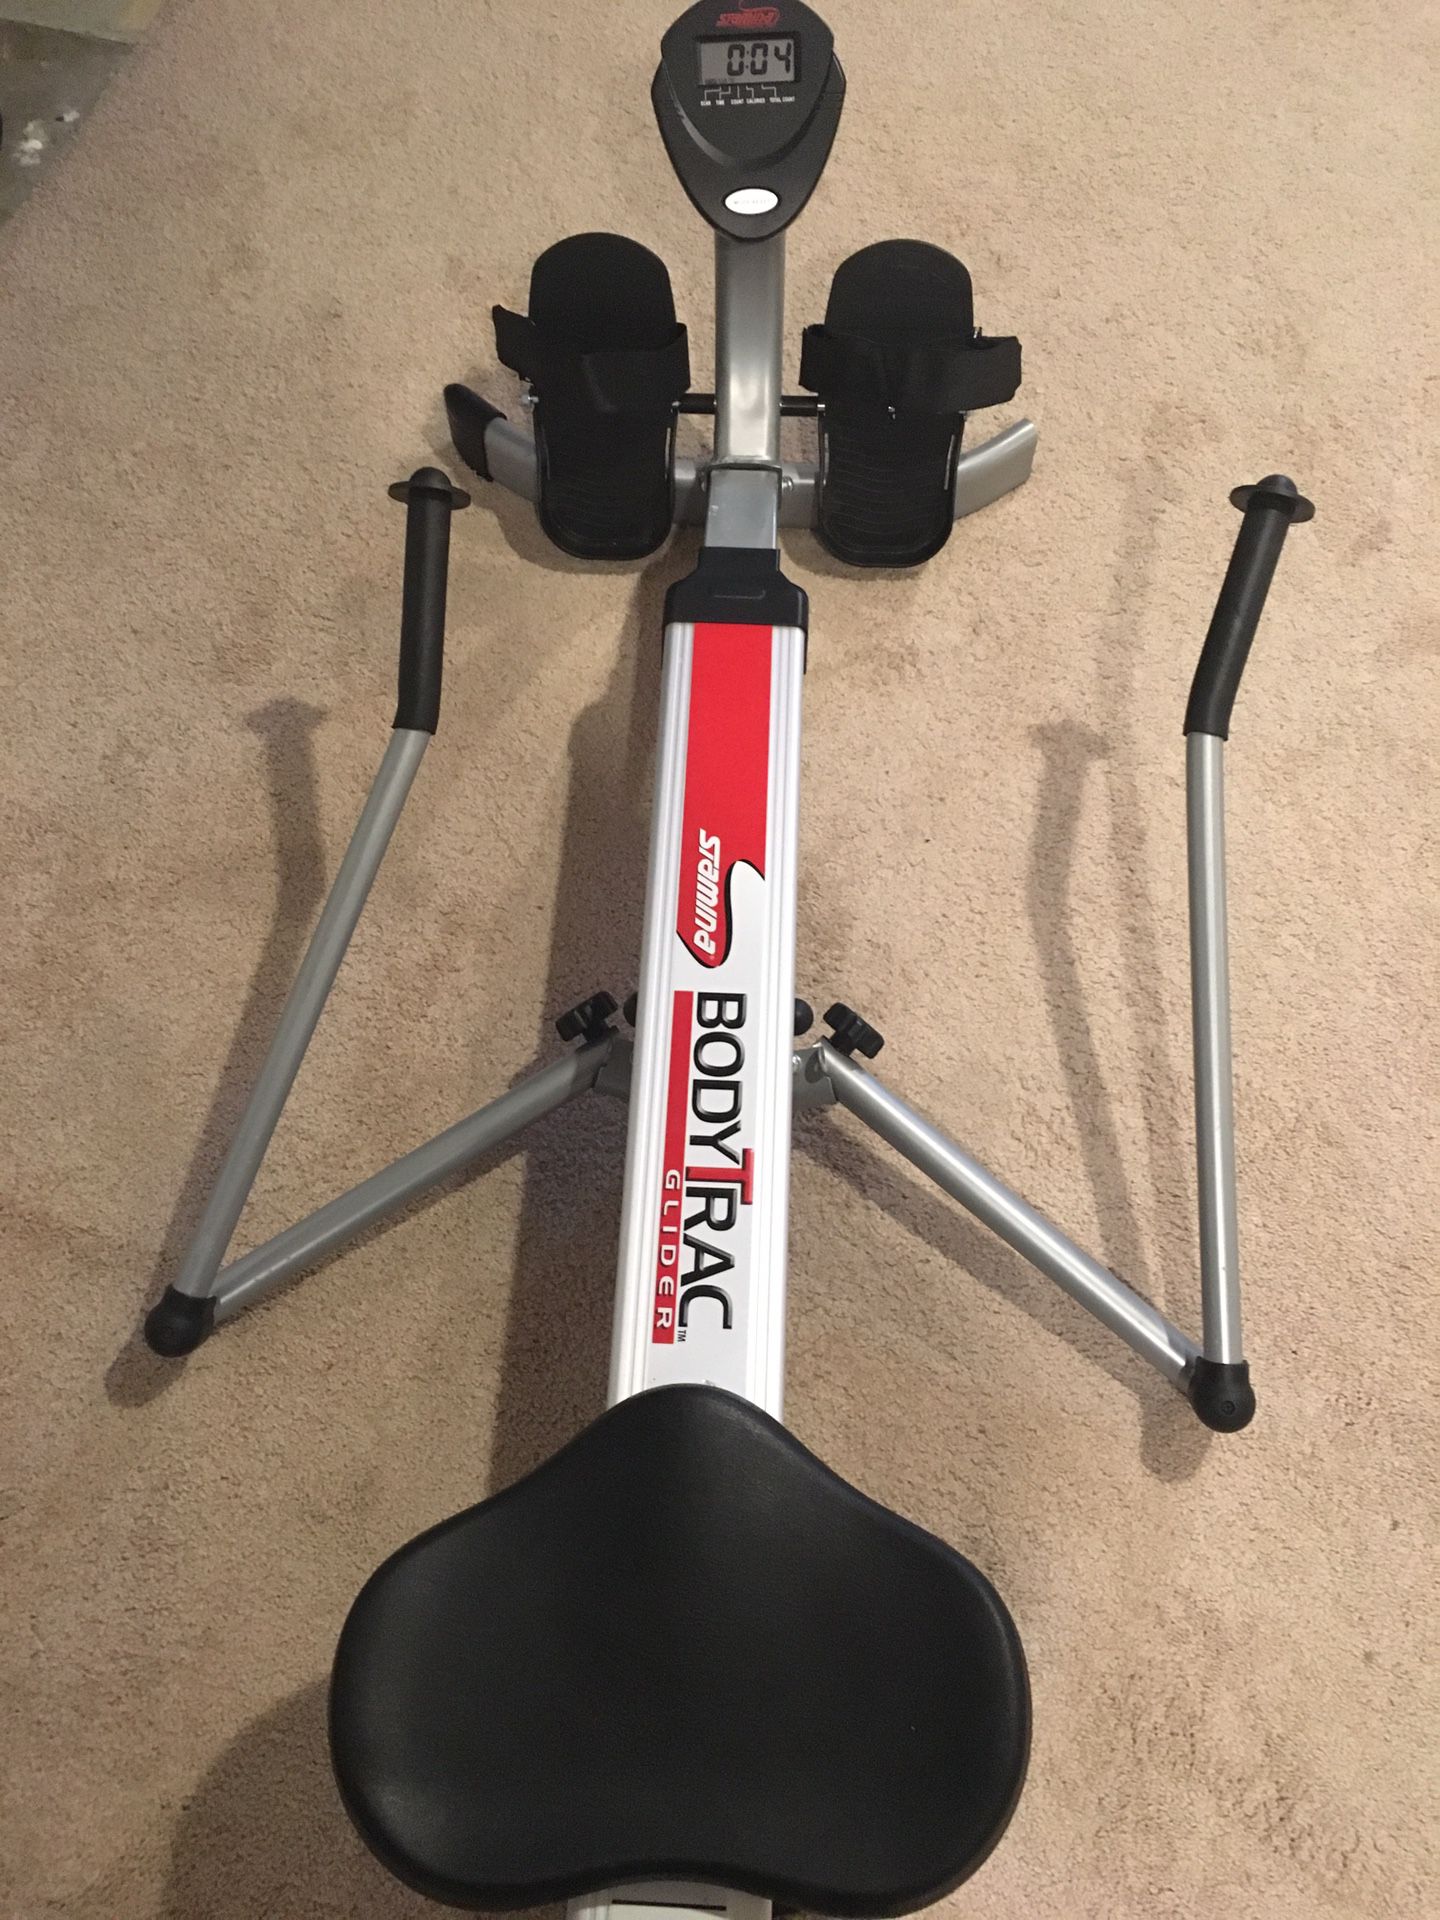 New Rowing Machine, Never Used  Missing A Plastic Shoe On Front Brace